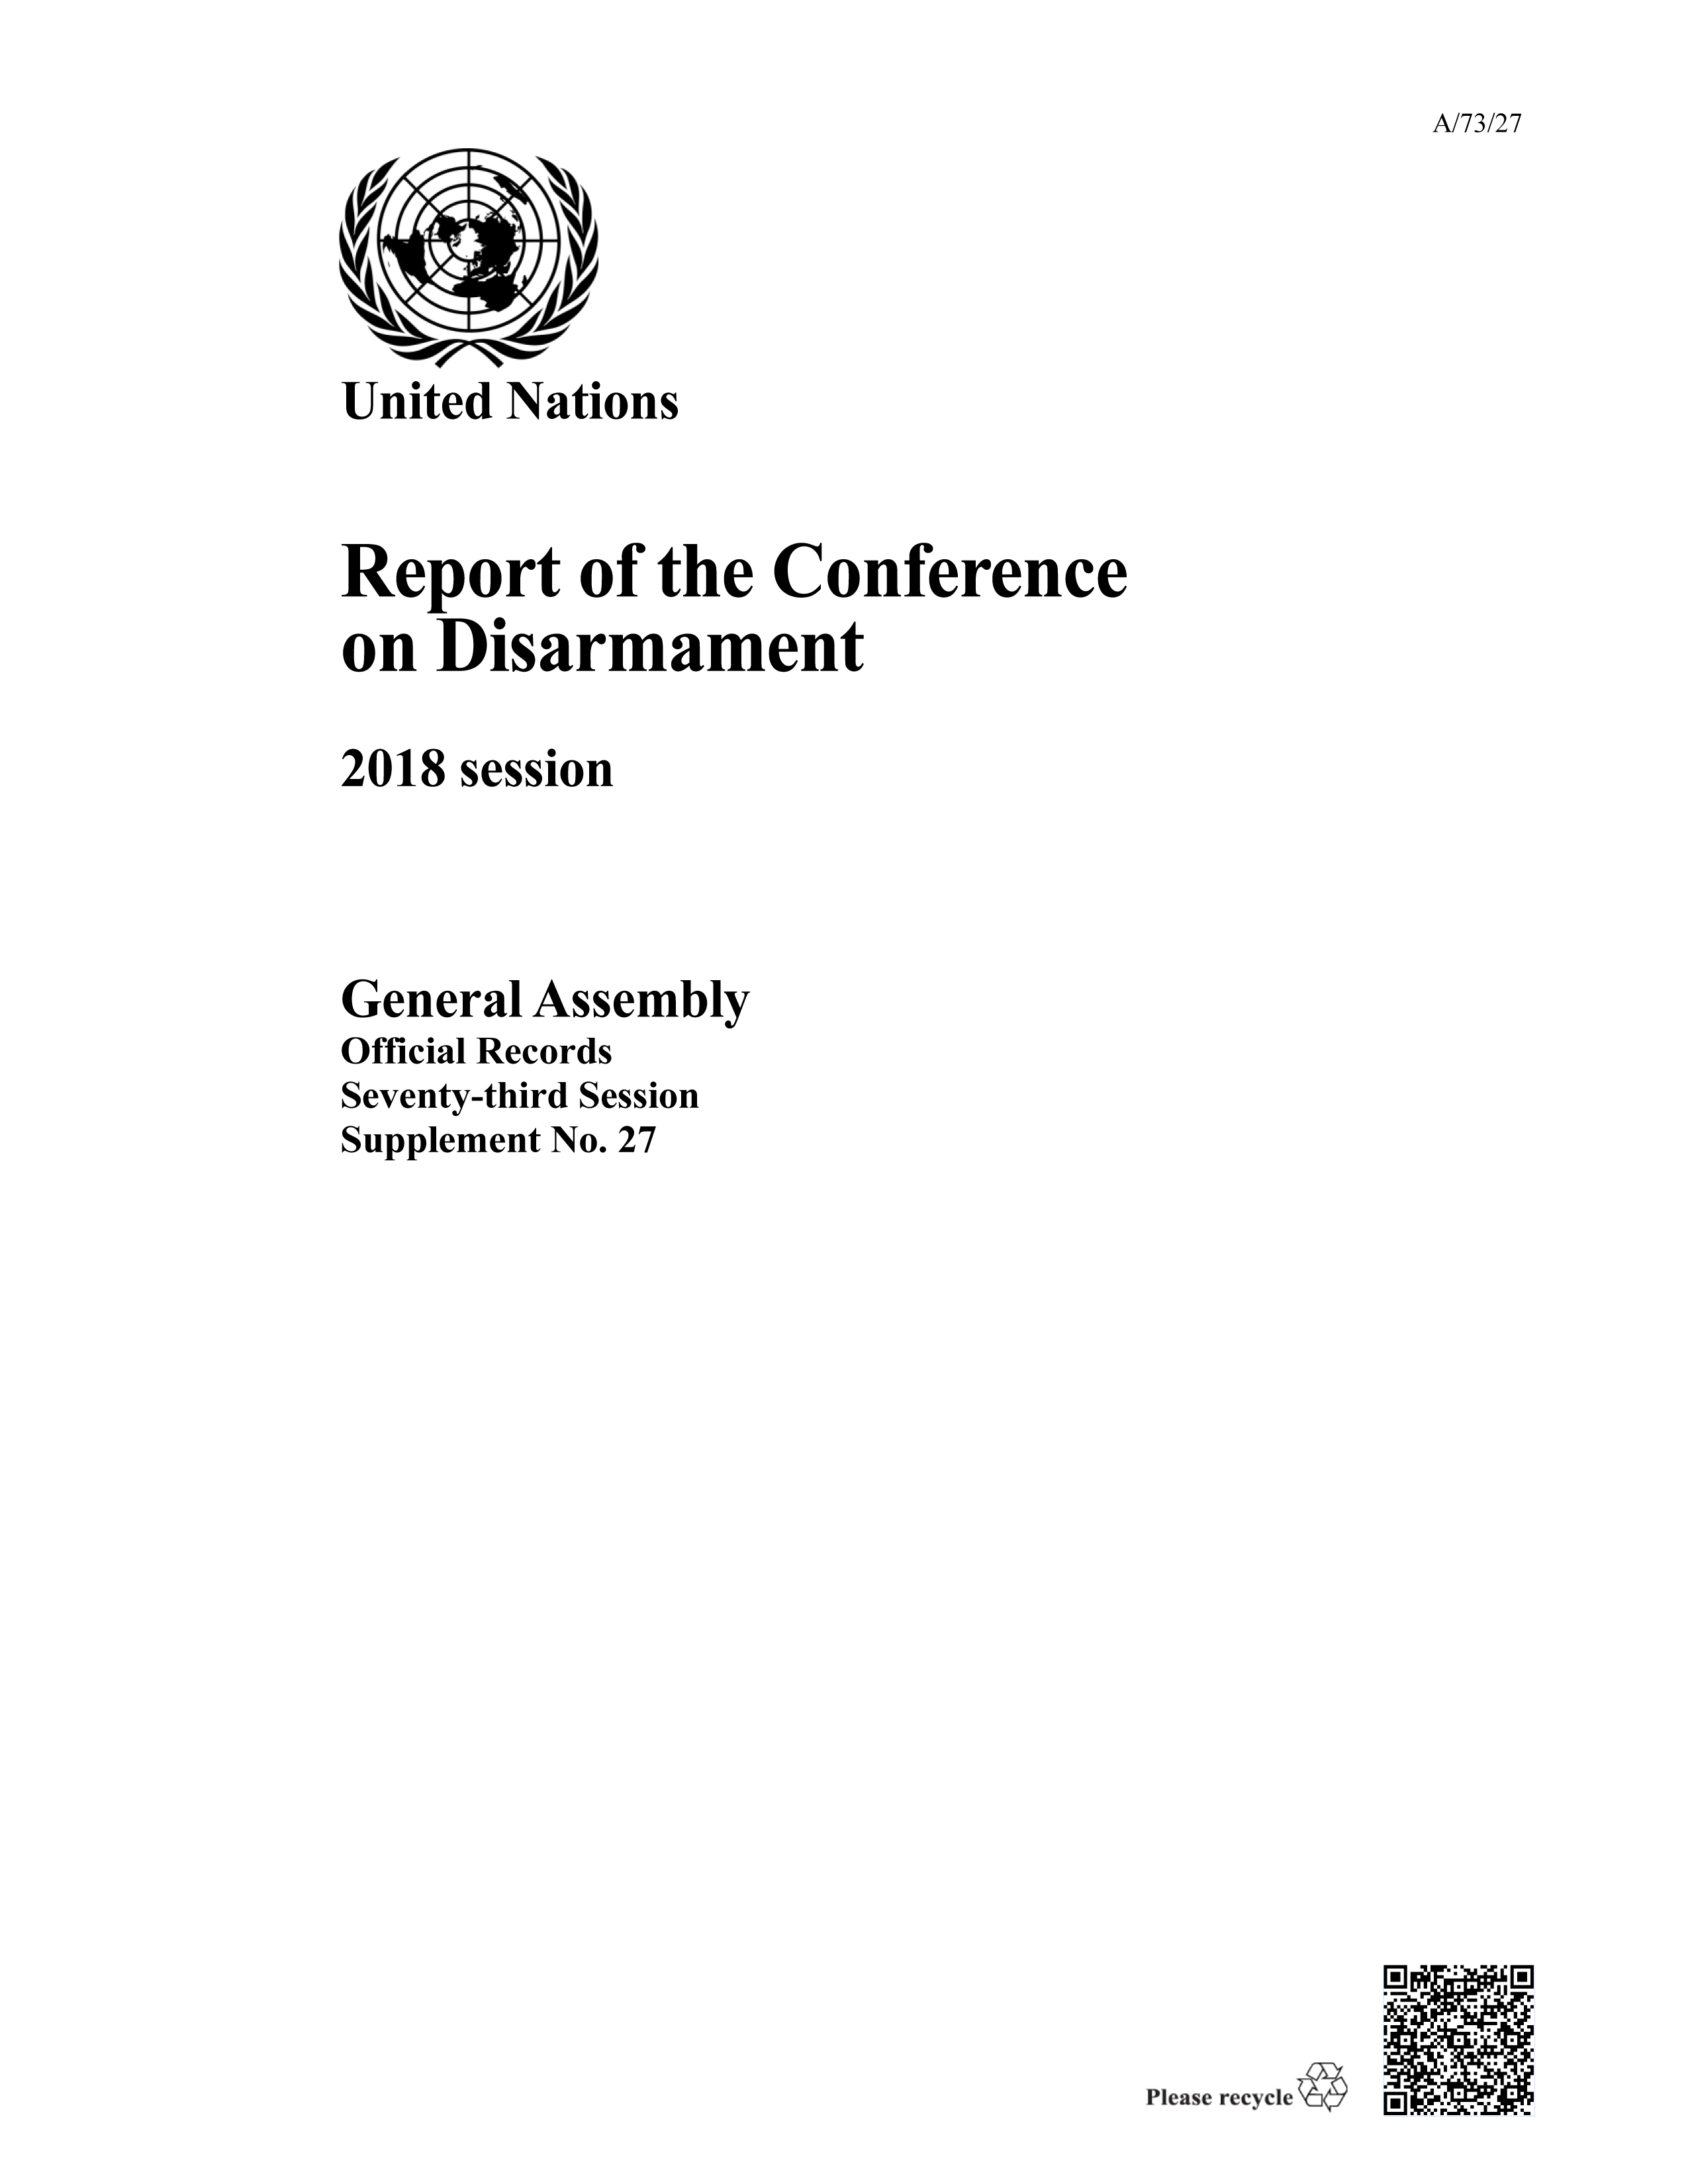 image of Report of the Conference on Disarmament: 2018 Session